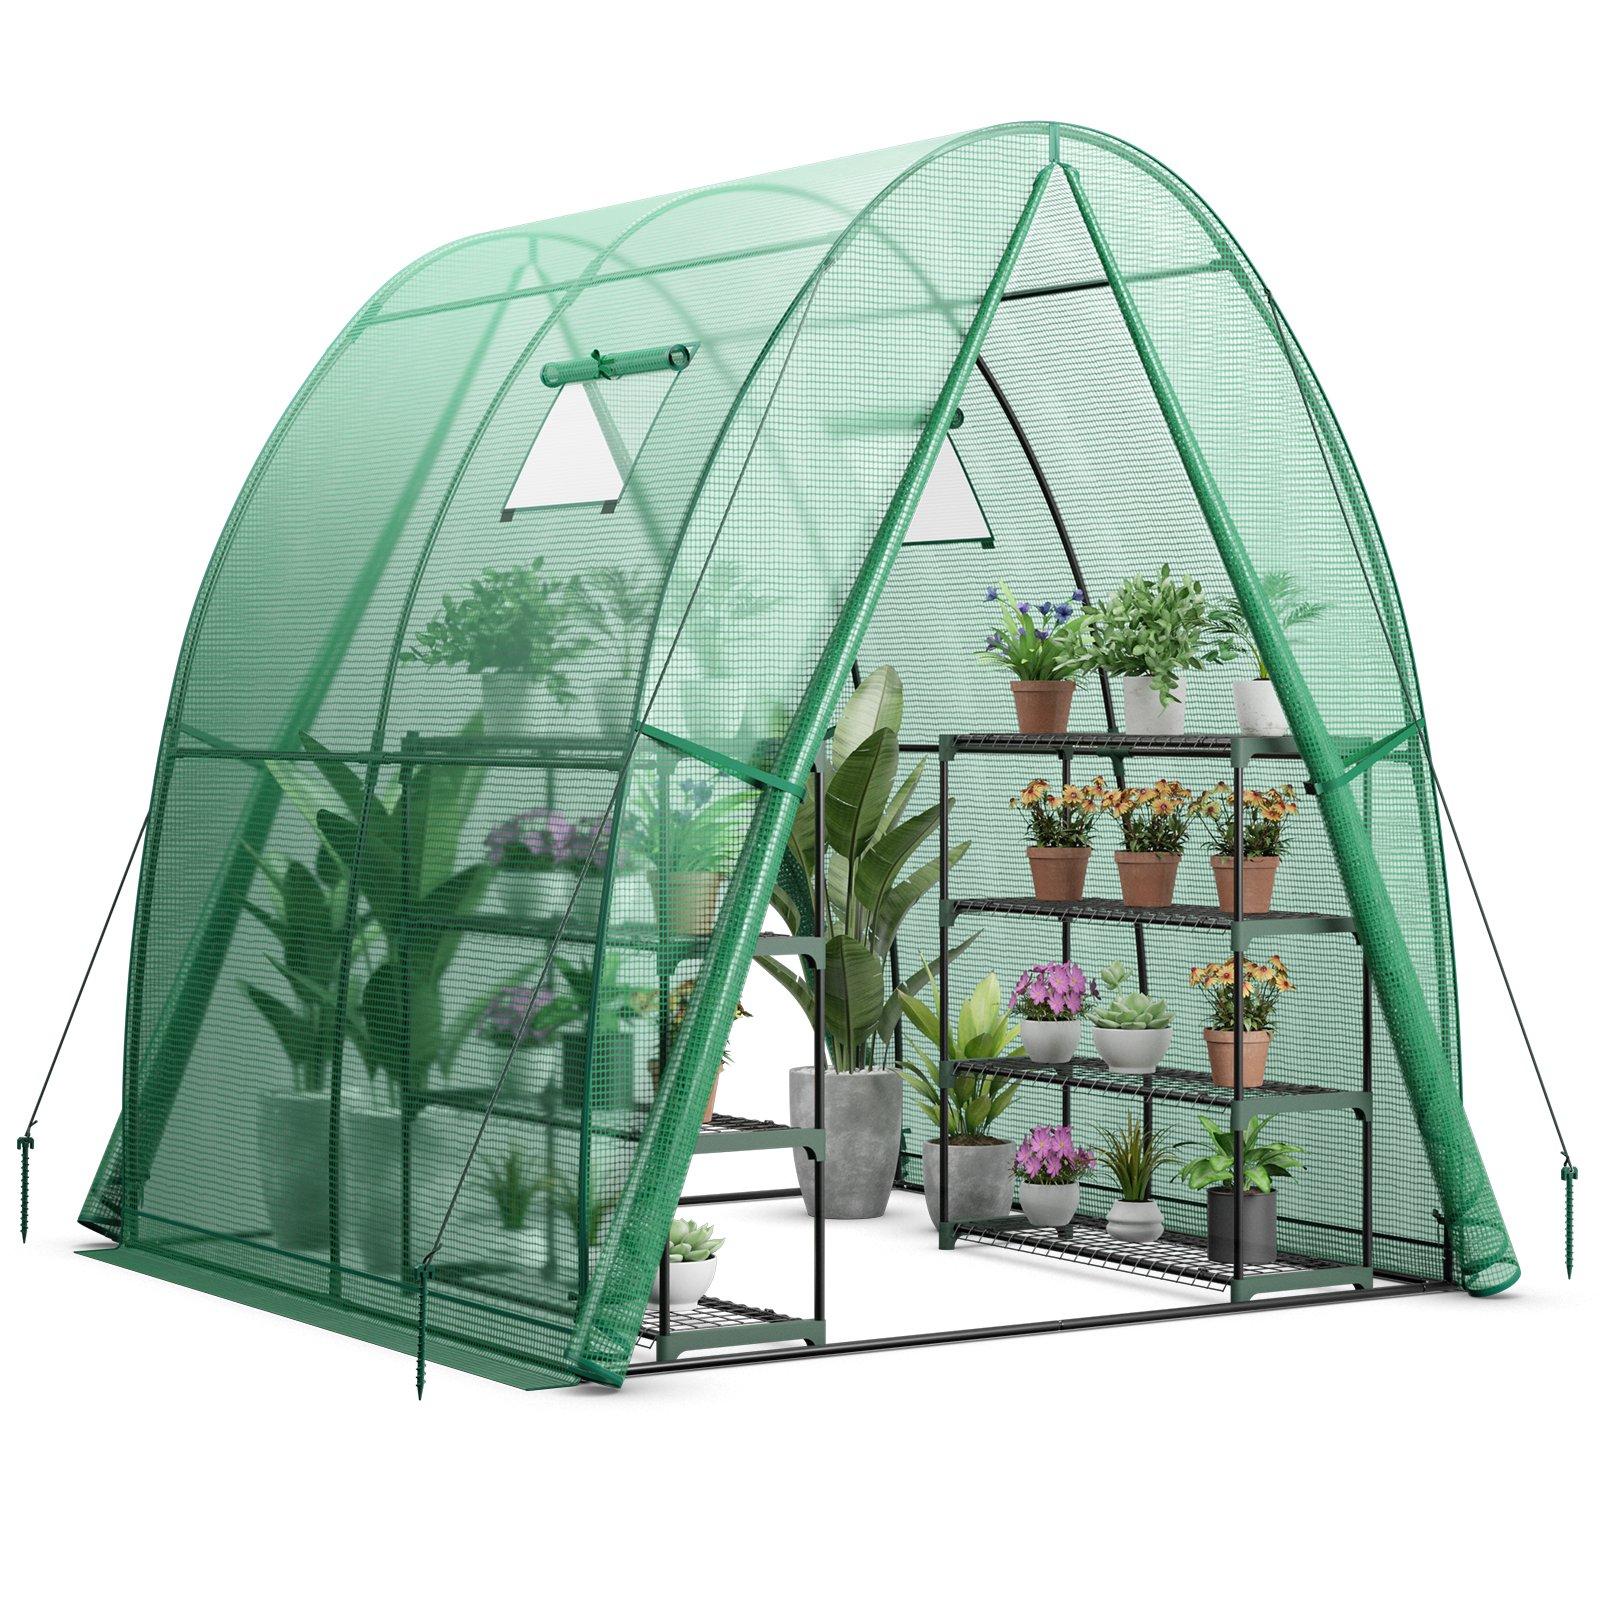 Portable Greenhouse 181 x 181 x 200 cm Outdoor Wall-in Tunnel Greenhouse